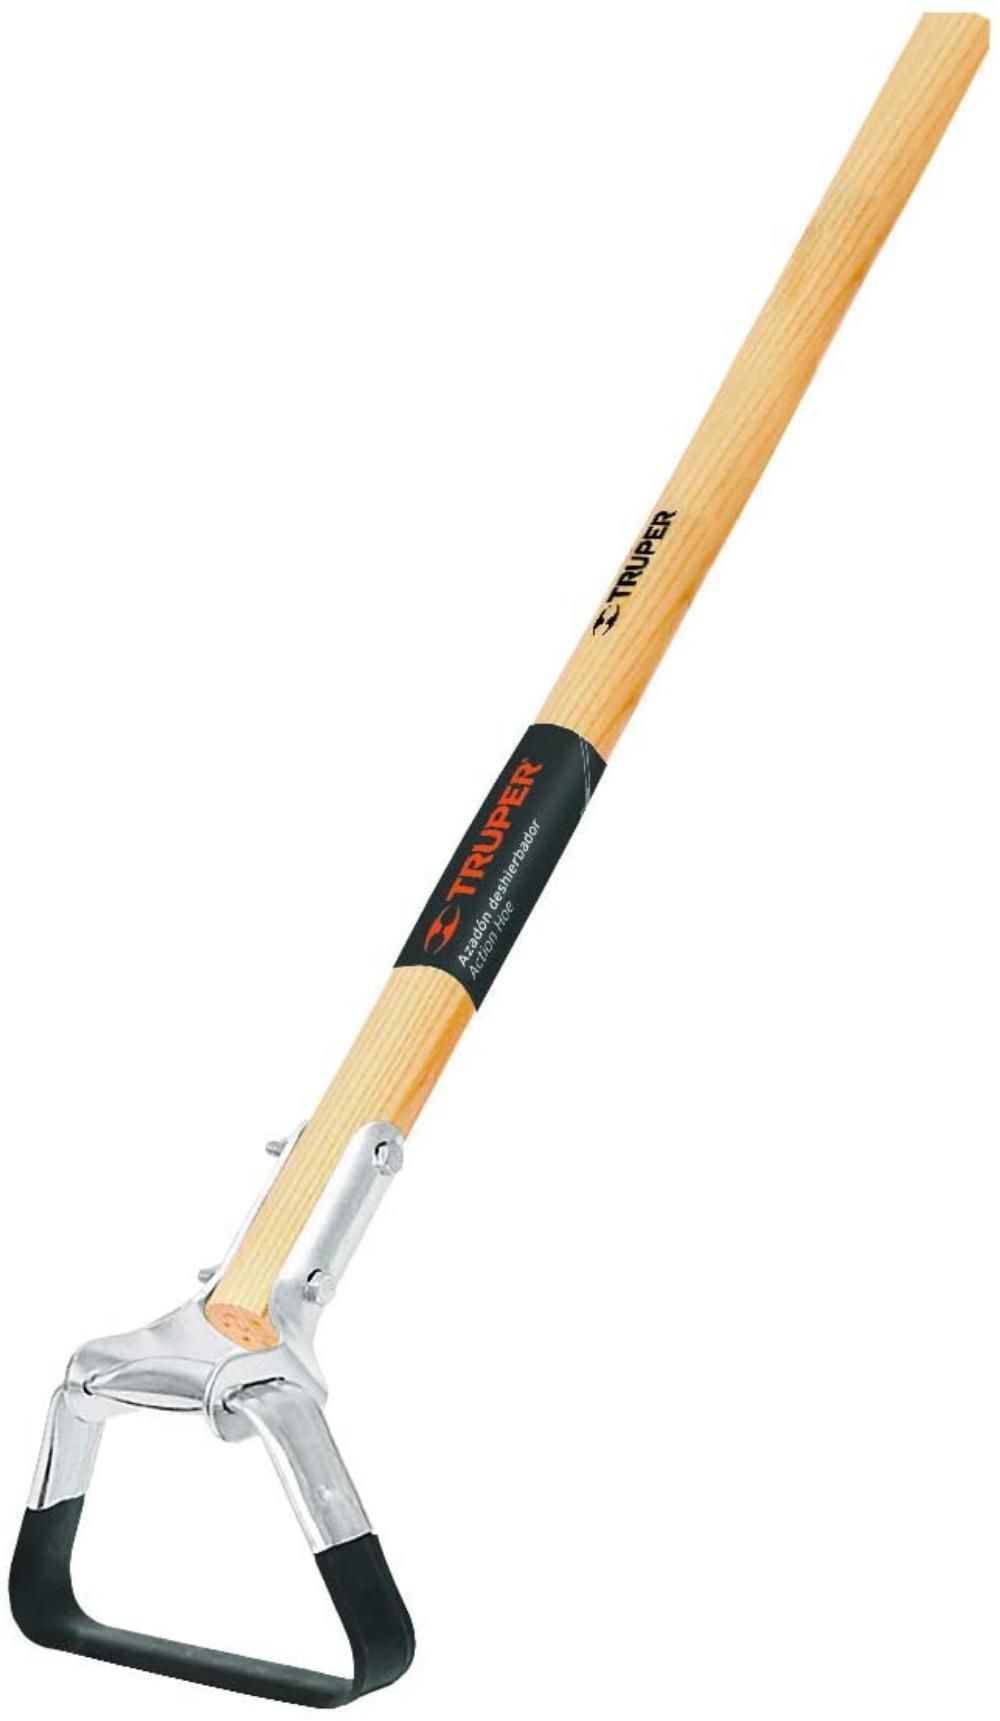 Flexrake 1000L Hula-ho Weeder Cultivator With 54-inch Wood Handle for sale online 